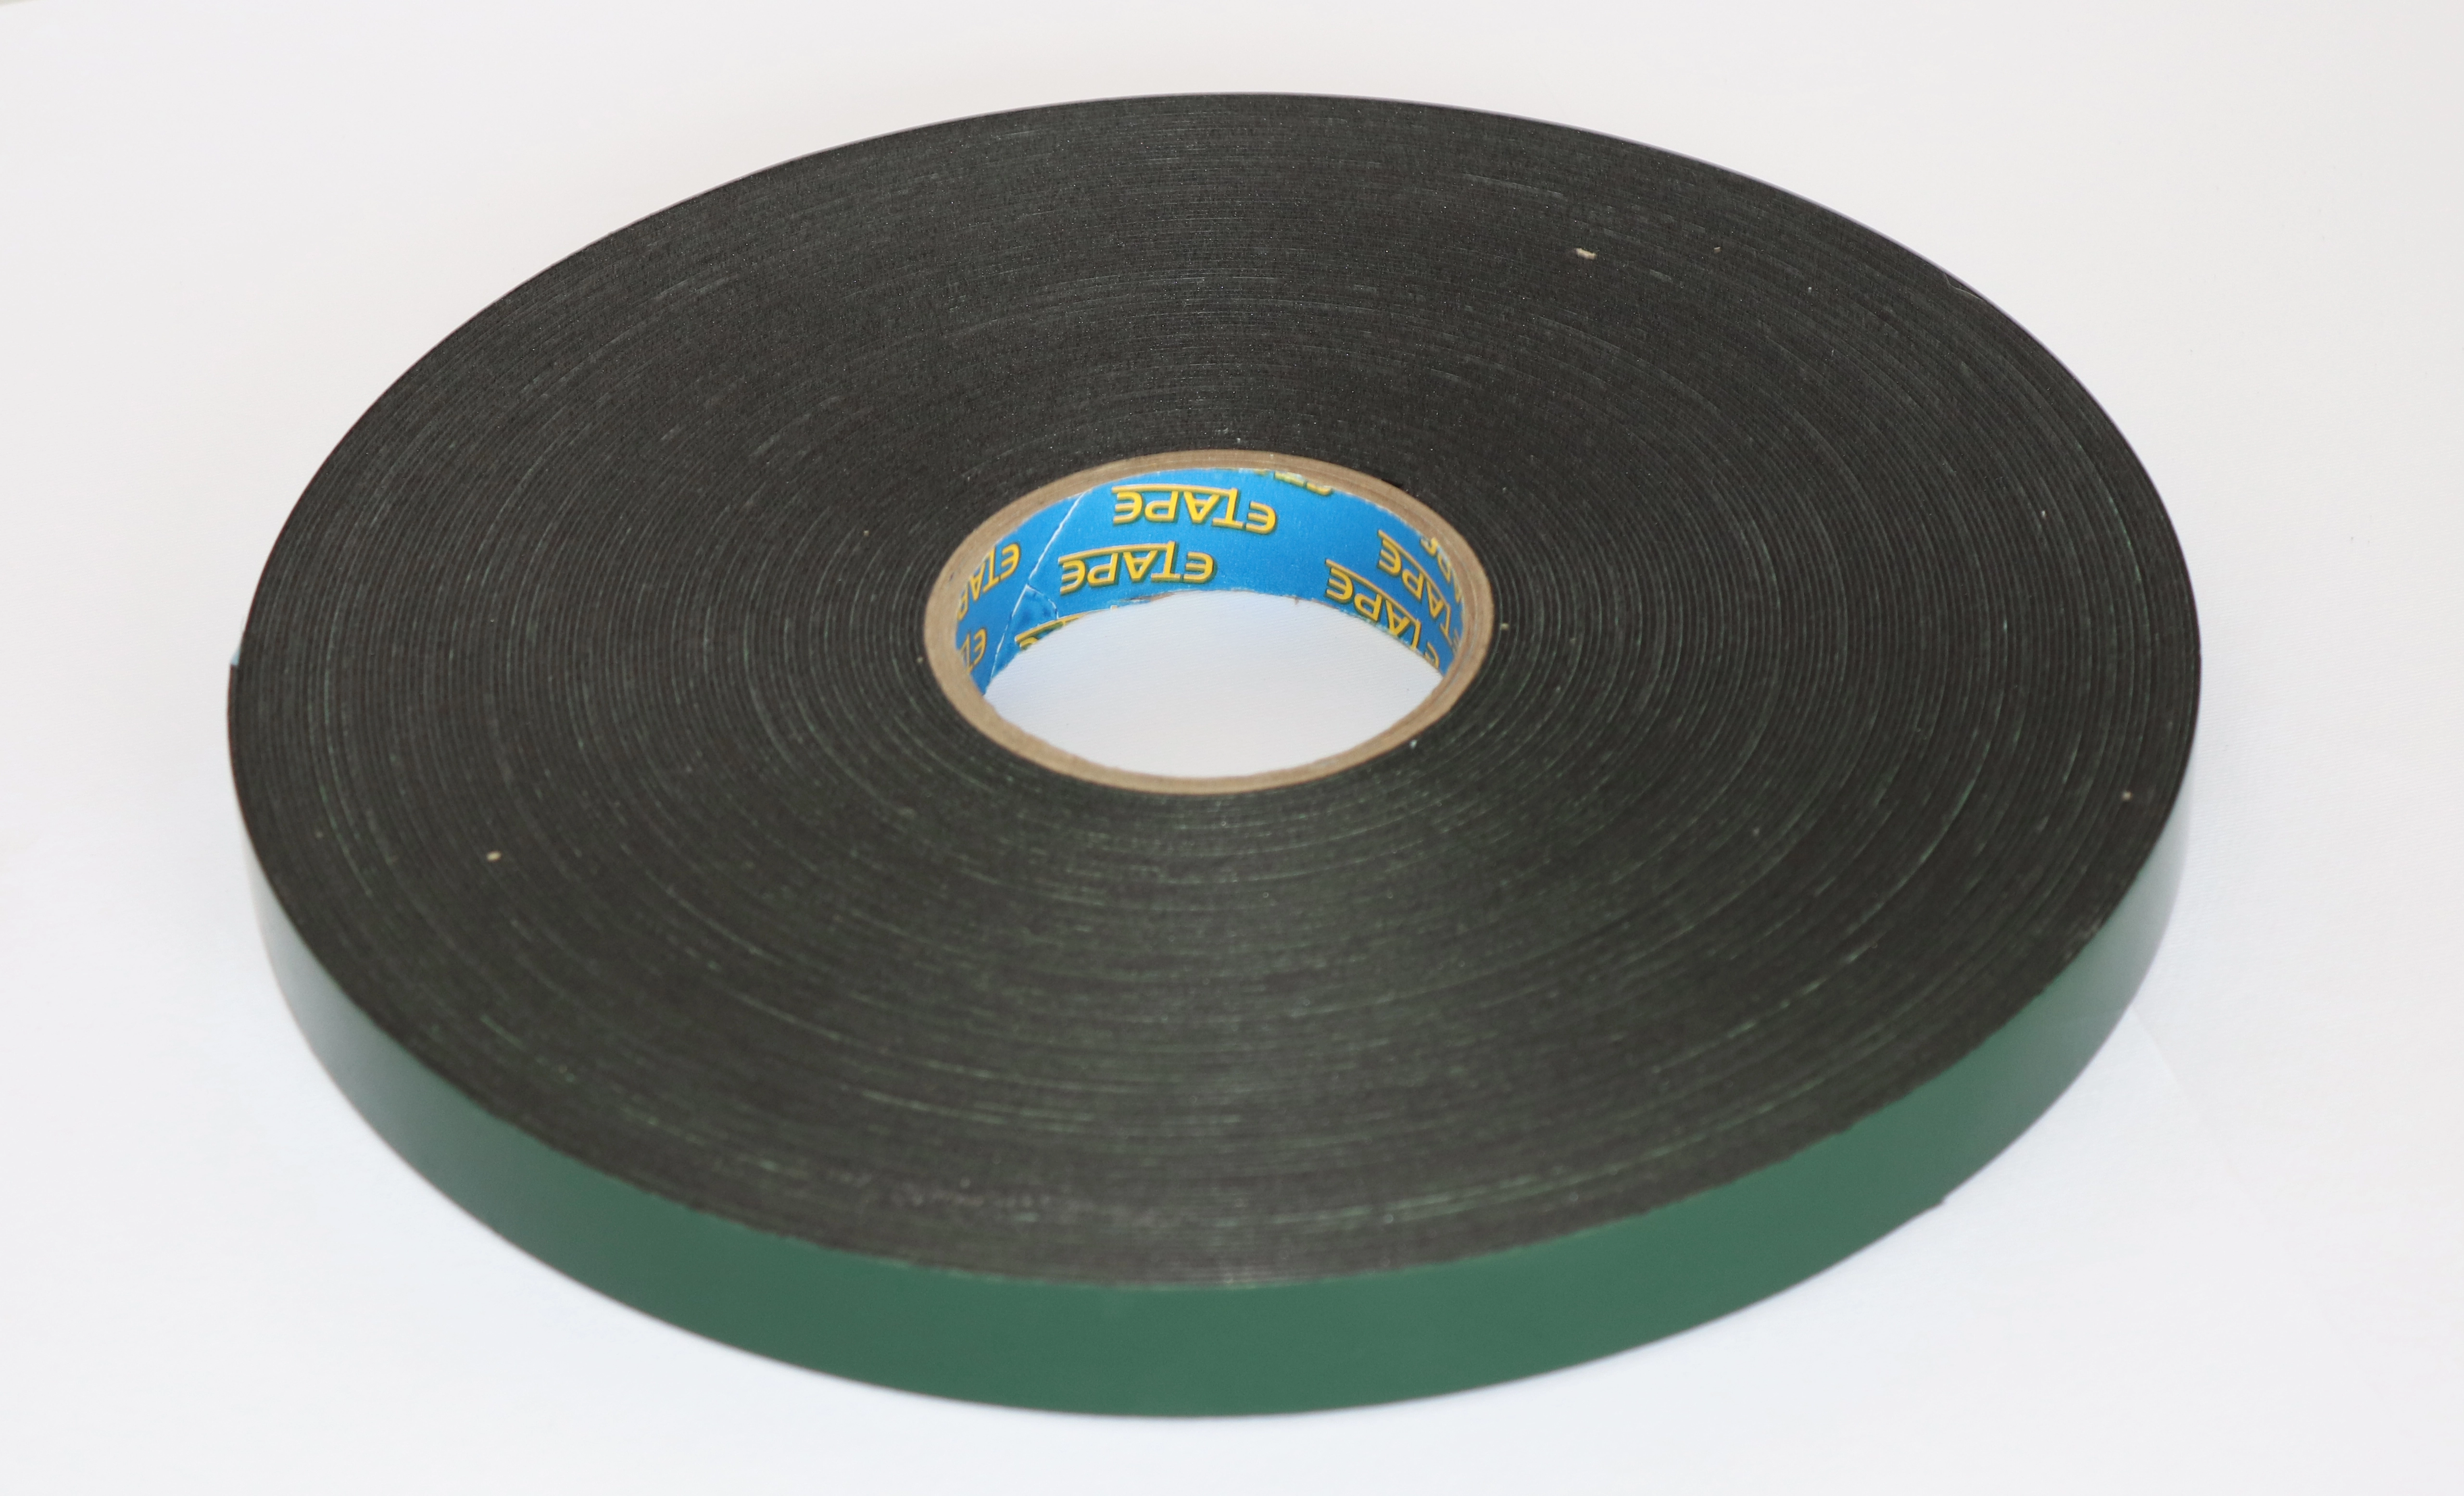 Double sided tape used for mounting or splicing sold by Easitape